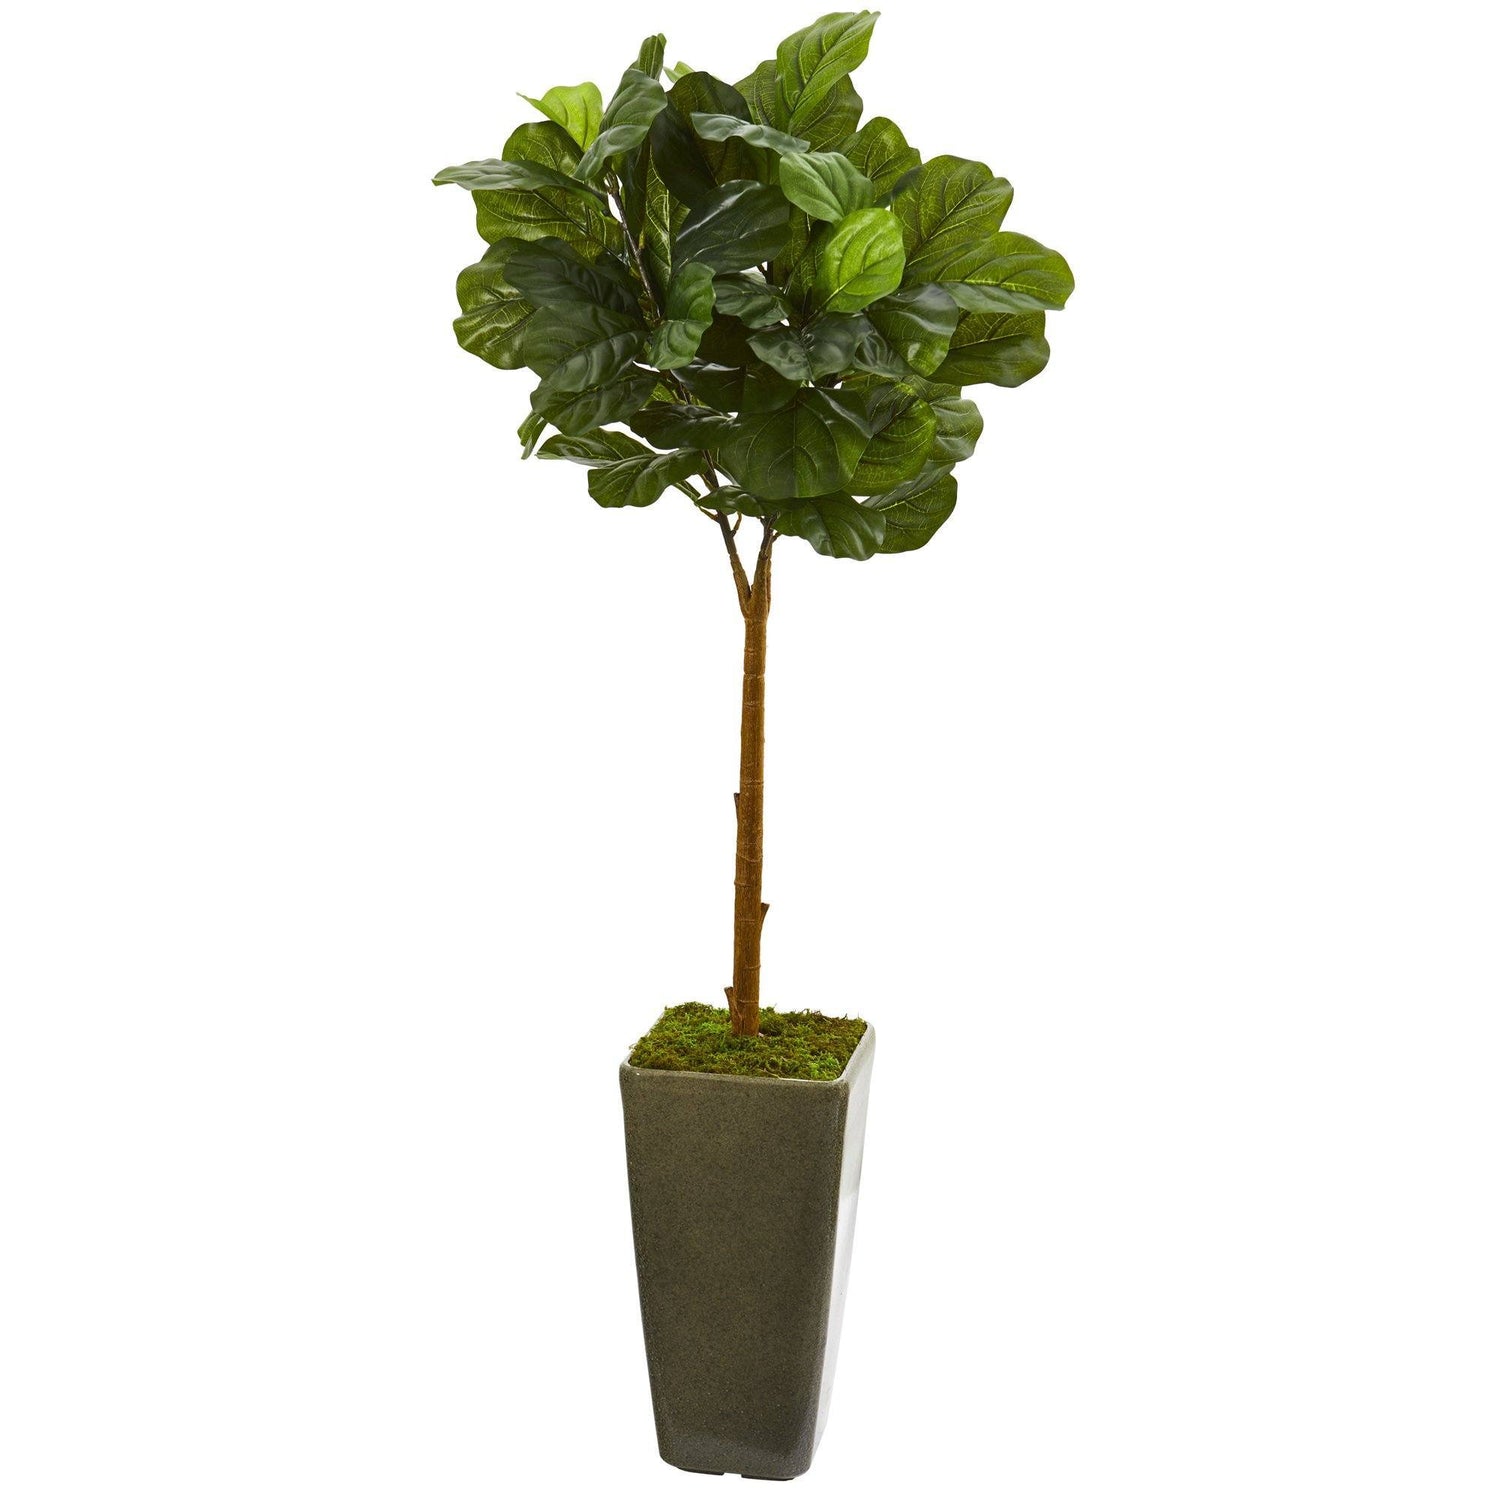 4’ Fiddle Leaf Artificial Tree in Green Planter (Real Touch)